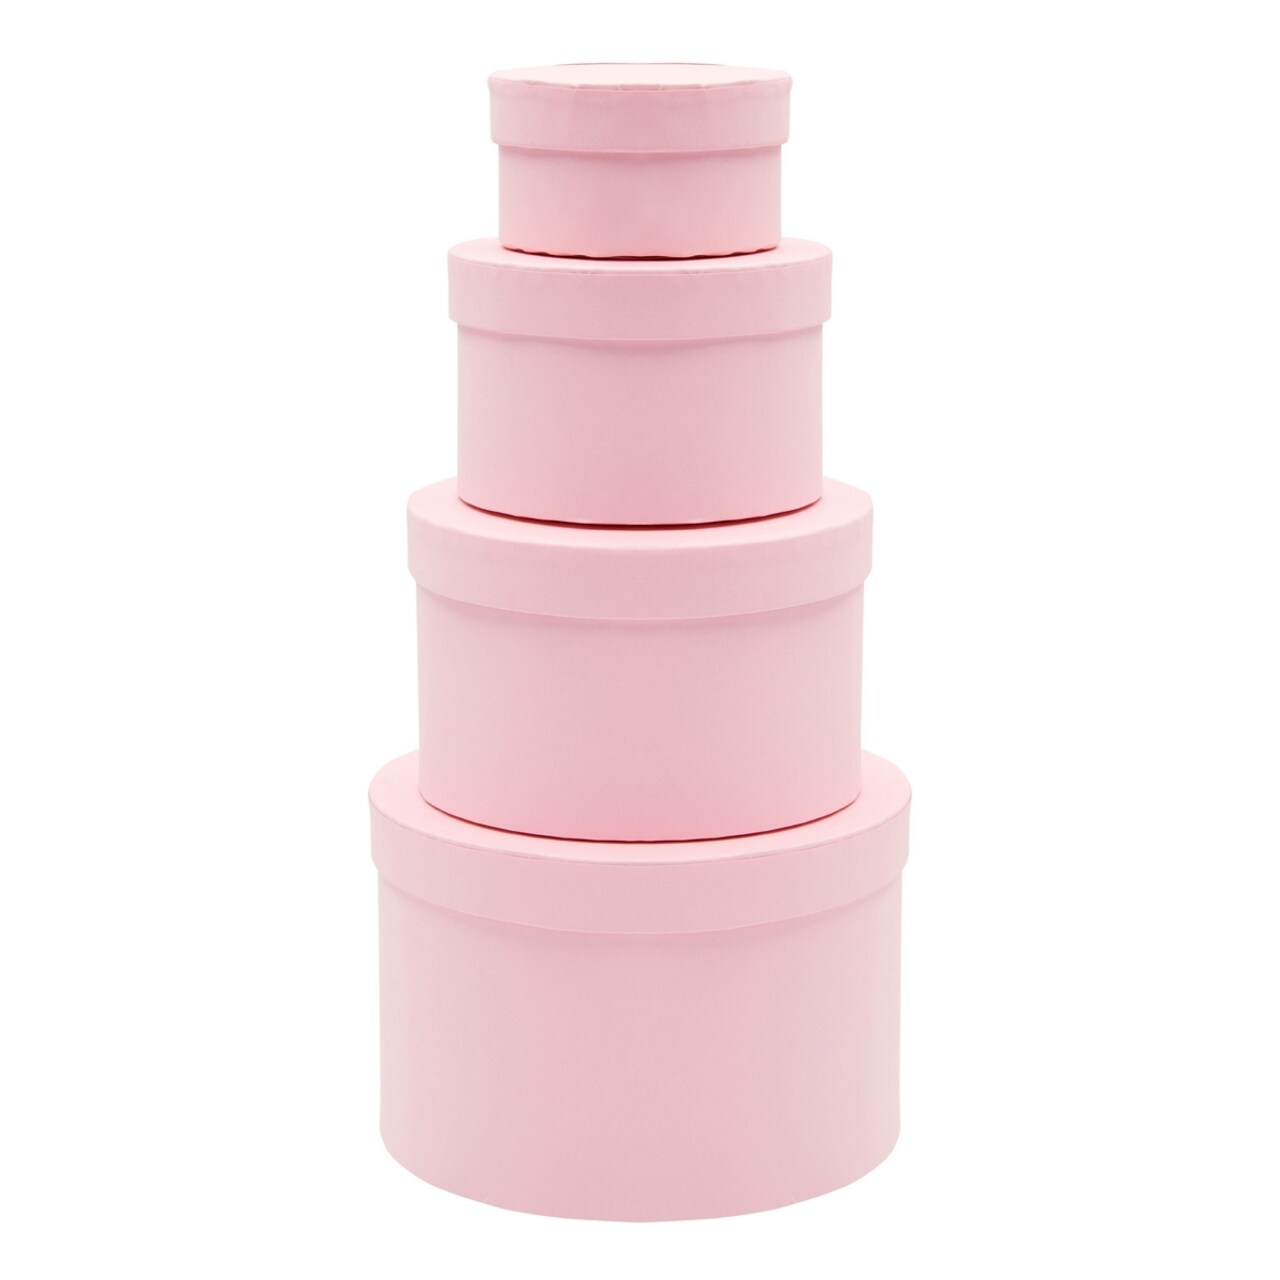 Set of 4 Round Nesting Gift Boxes with Lids, Small Circular